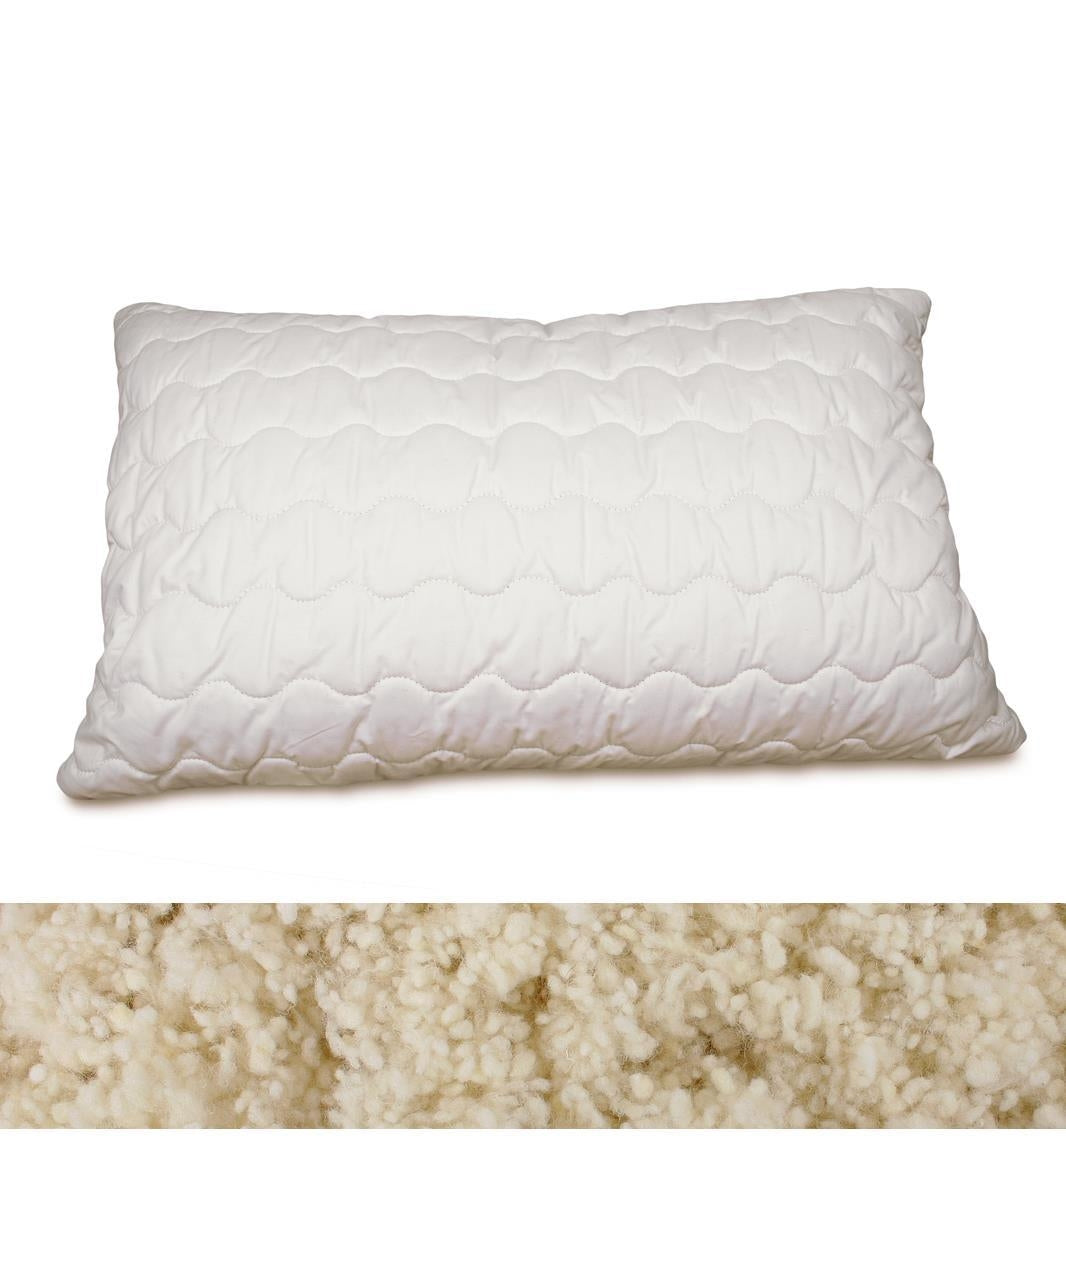 Organic Wool Quilted Standard Pillow (40cm x 60cm) | Greenfibres | Raw Living UK | House &amp; Home | Bedding | Greenfibres Quilted Standard Organic Wool Pillow (50cm x 75cm): wool is an excellent temperature &amp; moisture regulator, ensuring comfort &amp; balance.